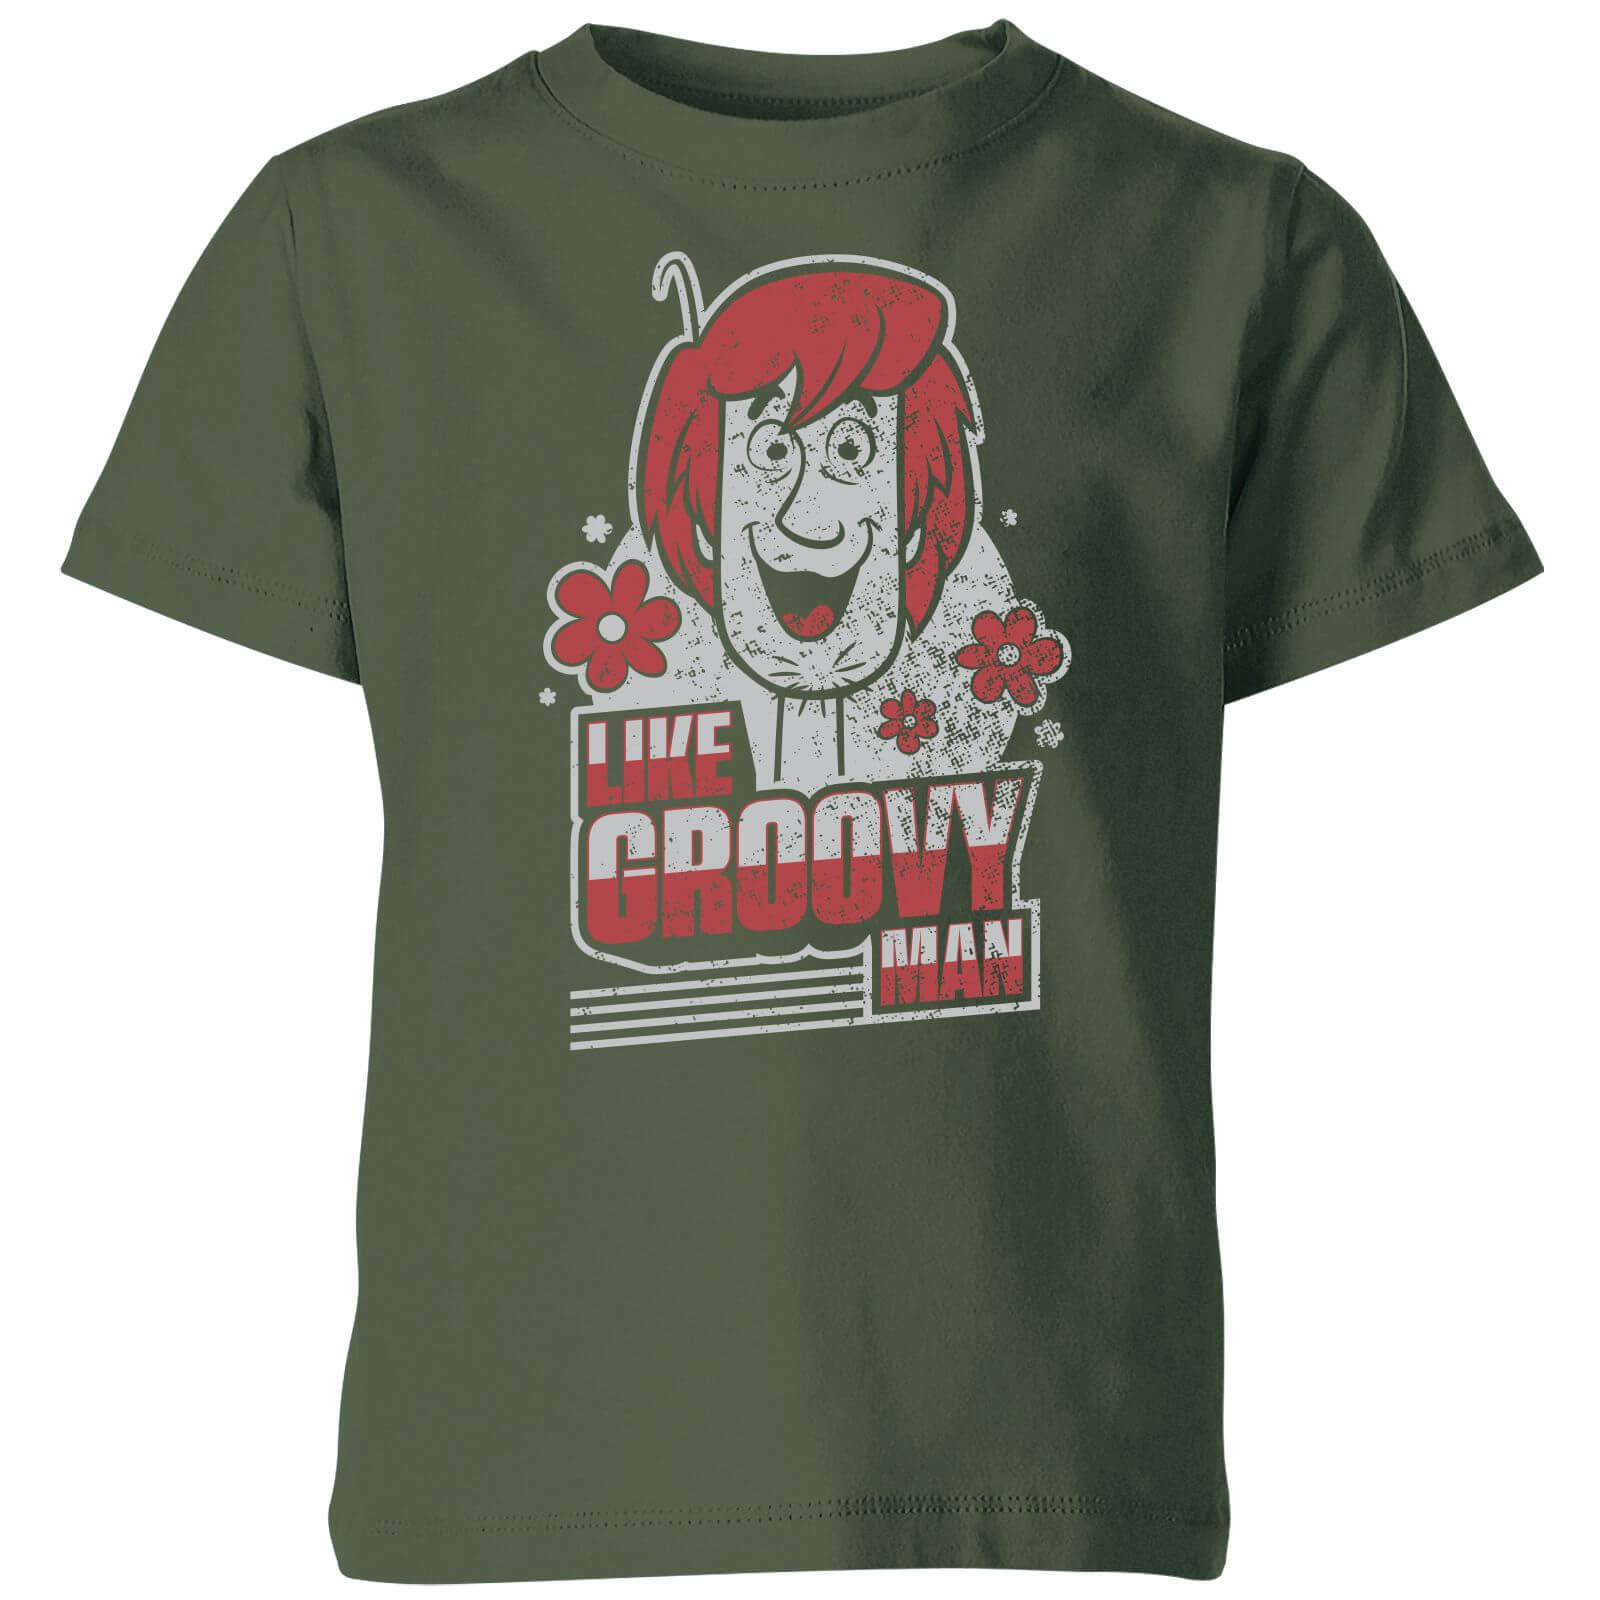 Image of Scooby Doo Like Groovy Man Kids' T-Shirt - Forest Green - 11-12 Jahre - Forest Green